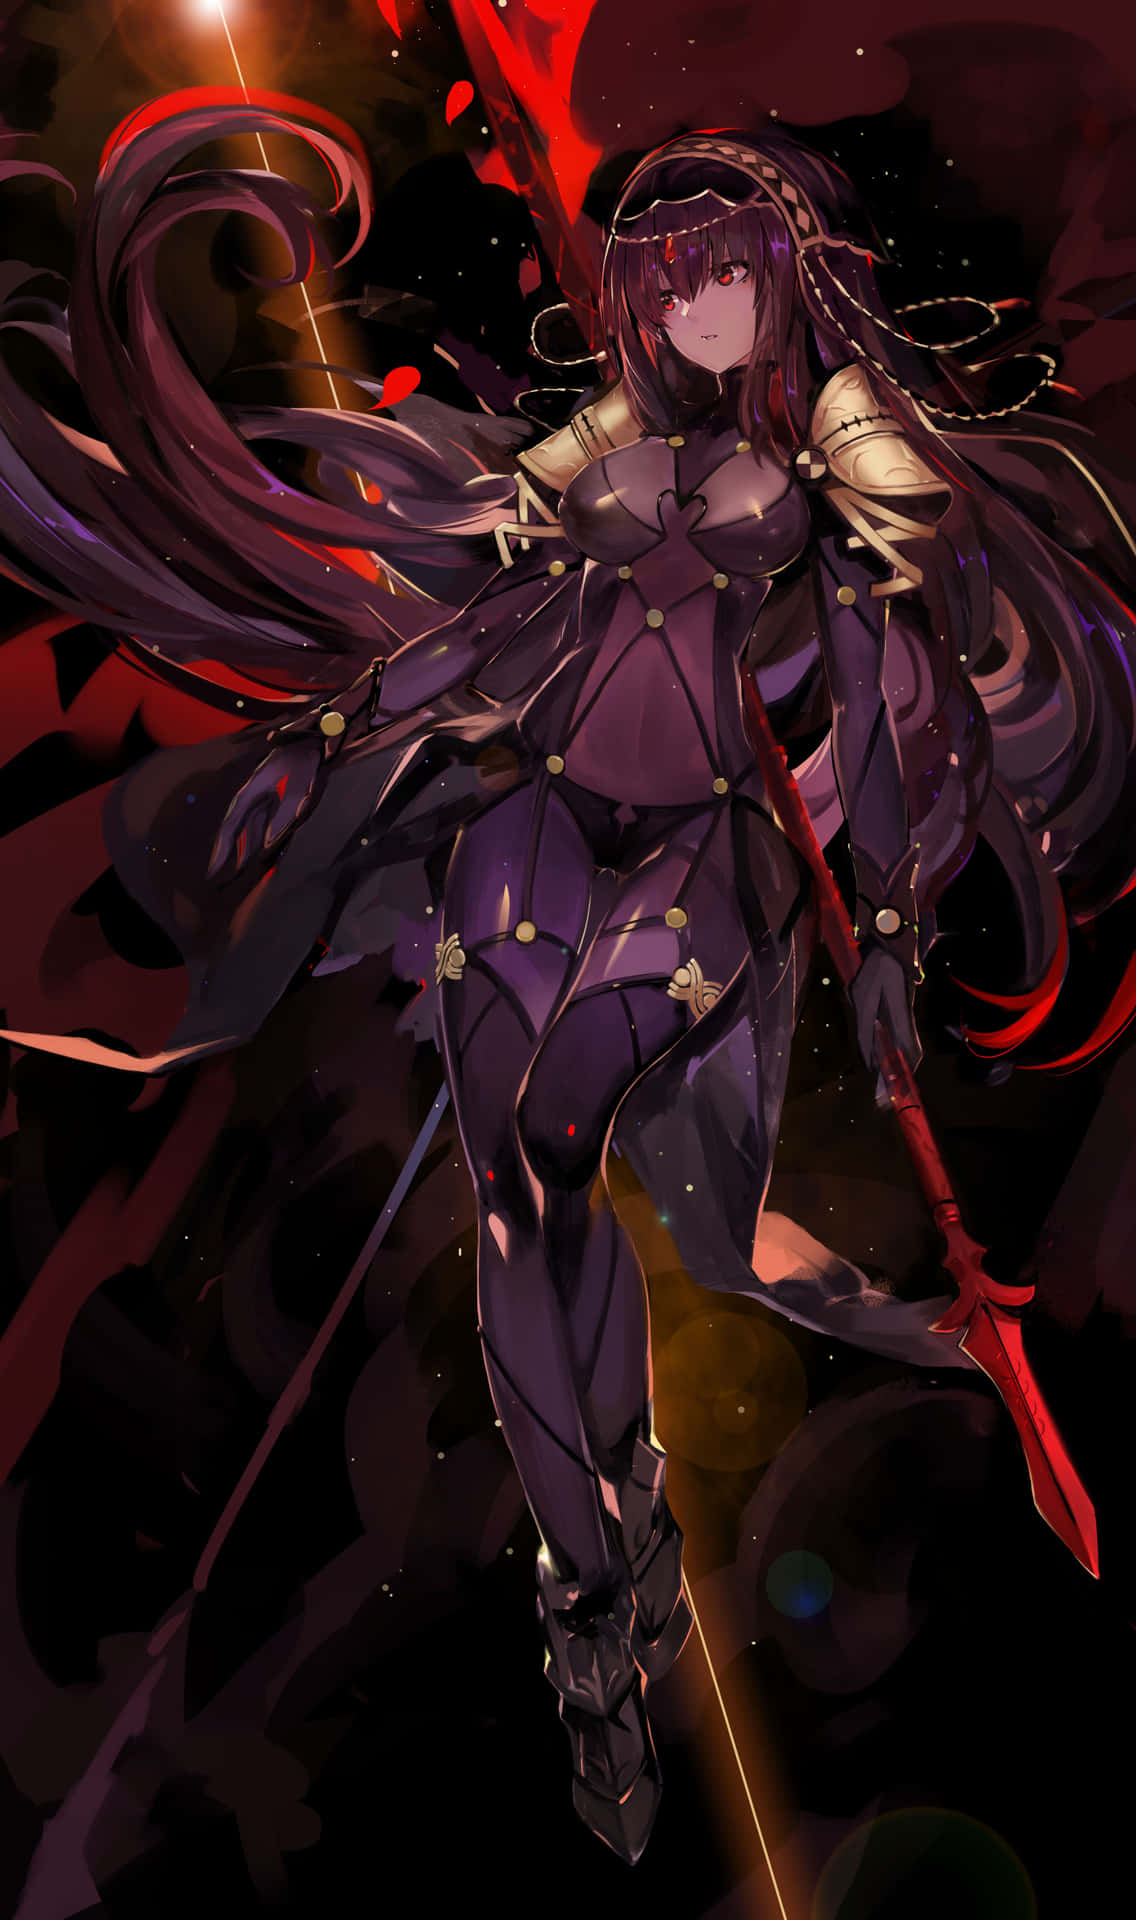 Stunning Artwork Of Scathach Skadi, The Goddess Of Shadows And Battle From The Fate Series Wallpaper